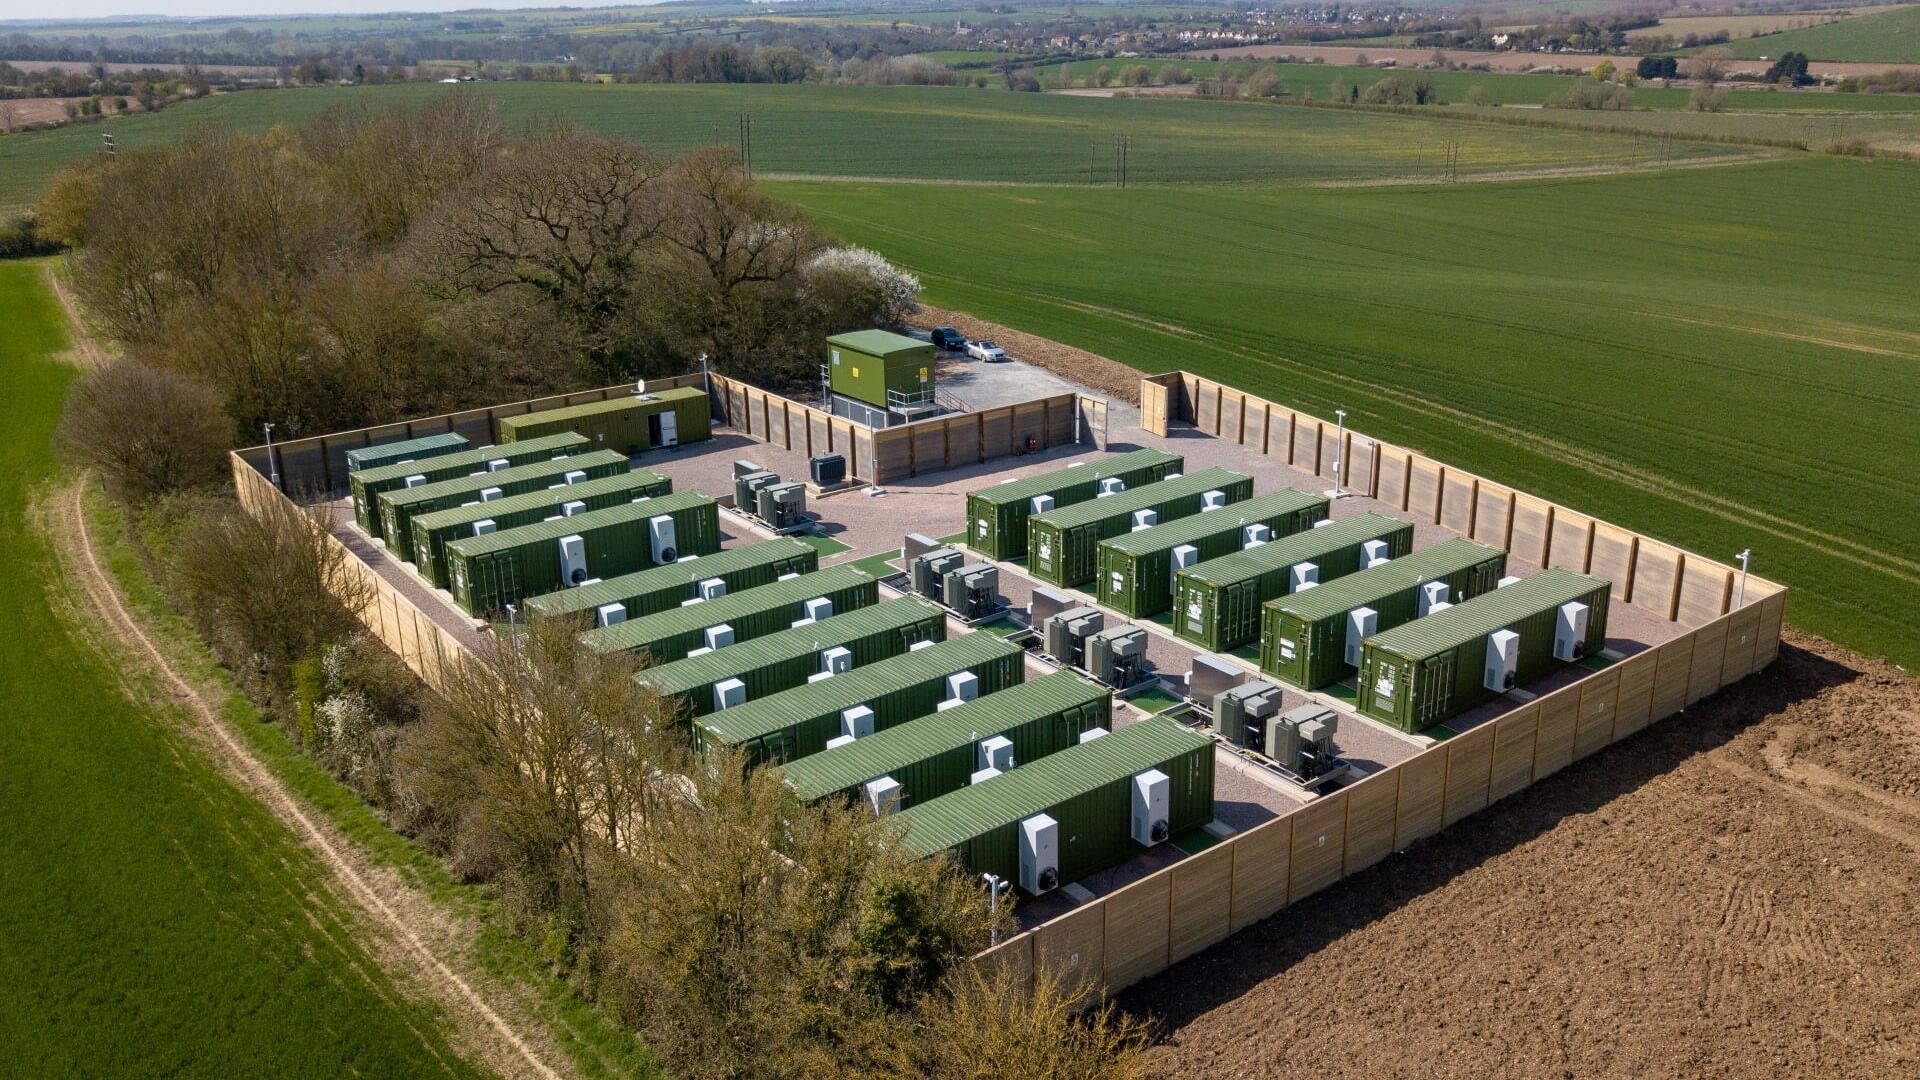 Aerial view of Capenhurst battery storage site amongst fields